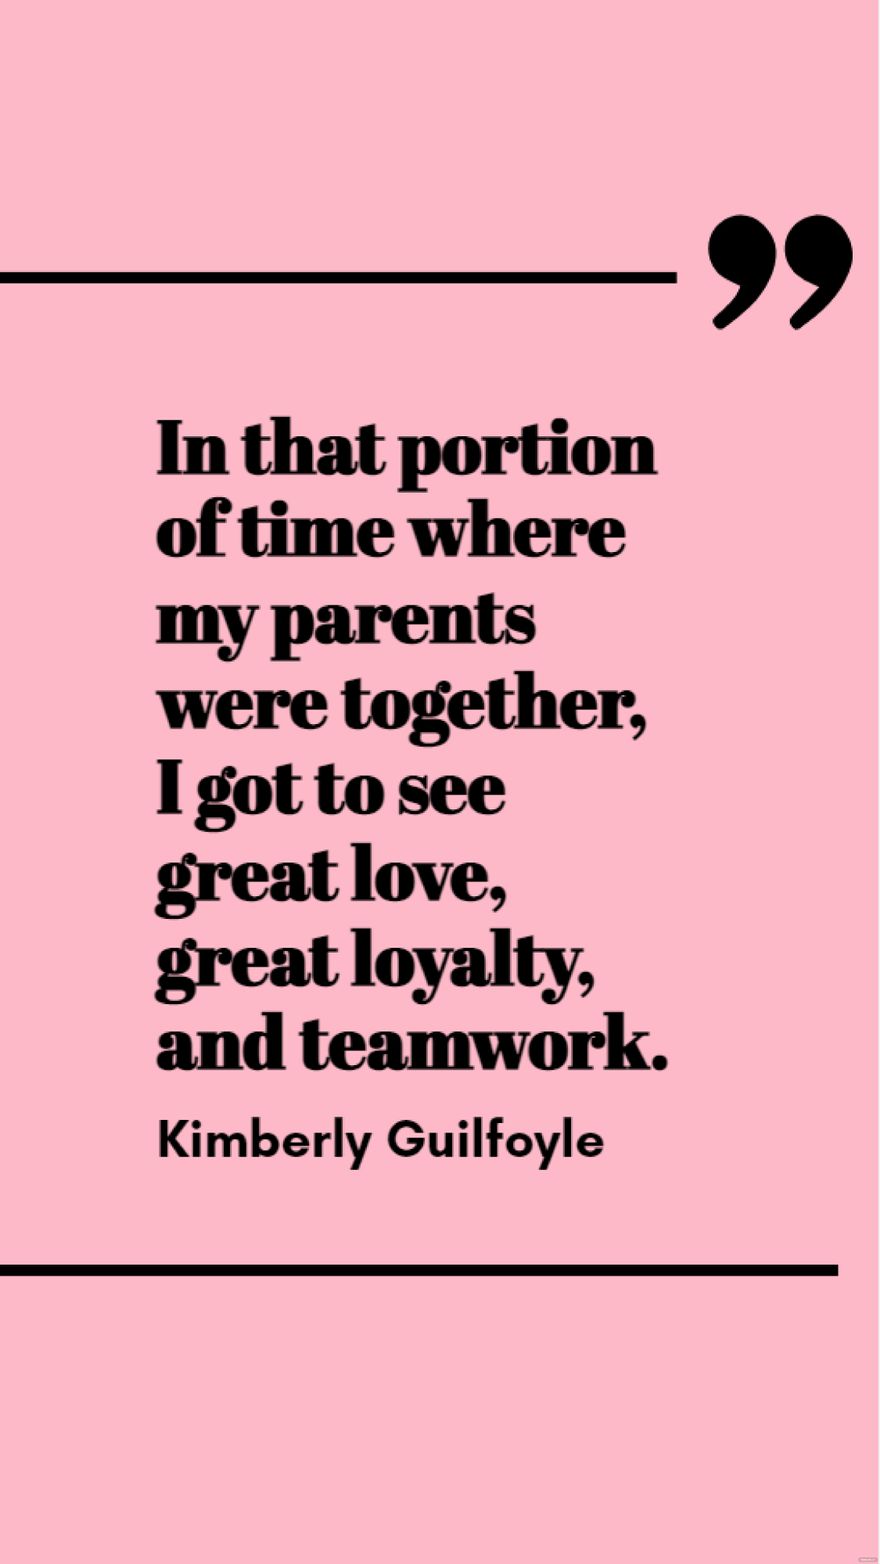 Kimberly Guilfoyle - In that portion of time where my parents were together, I got to see great love, great loyalty, and teamwork.